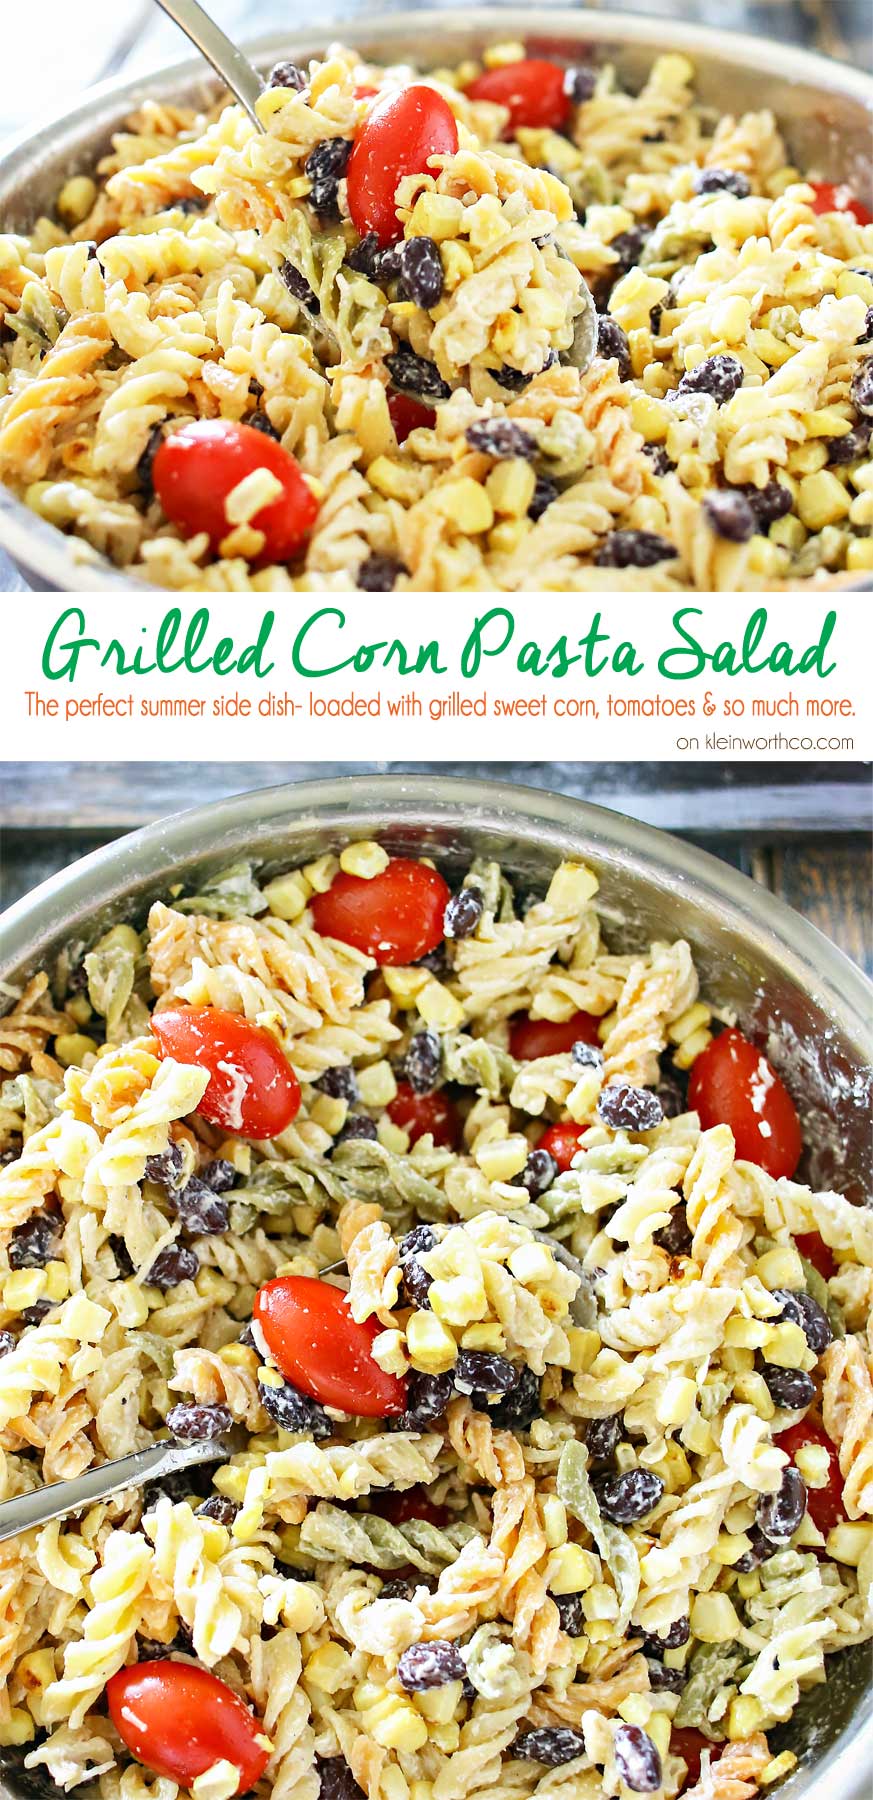 Grilled Corn Pasta Salad is the perfect easy side dish recipe to bring to all your holiday celebrations & backyard BBQ's. Delicious pasta salad for a crowd.